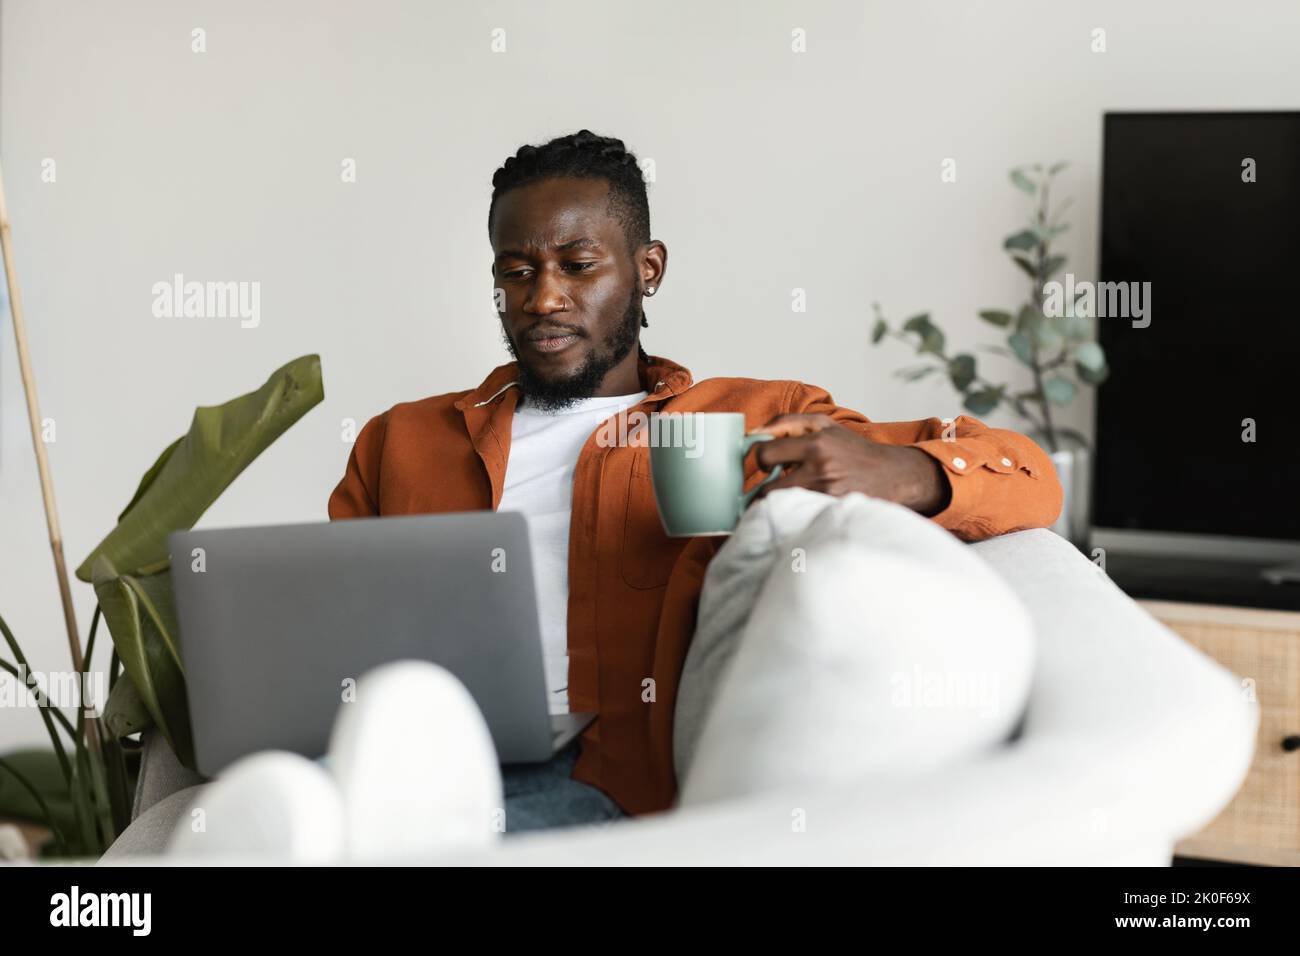 African american man working on laptop, holding cup and enjoying drinking morning coffee, sitting on sofa at home Stock Photo